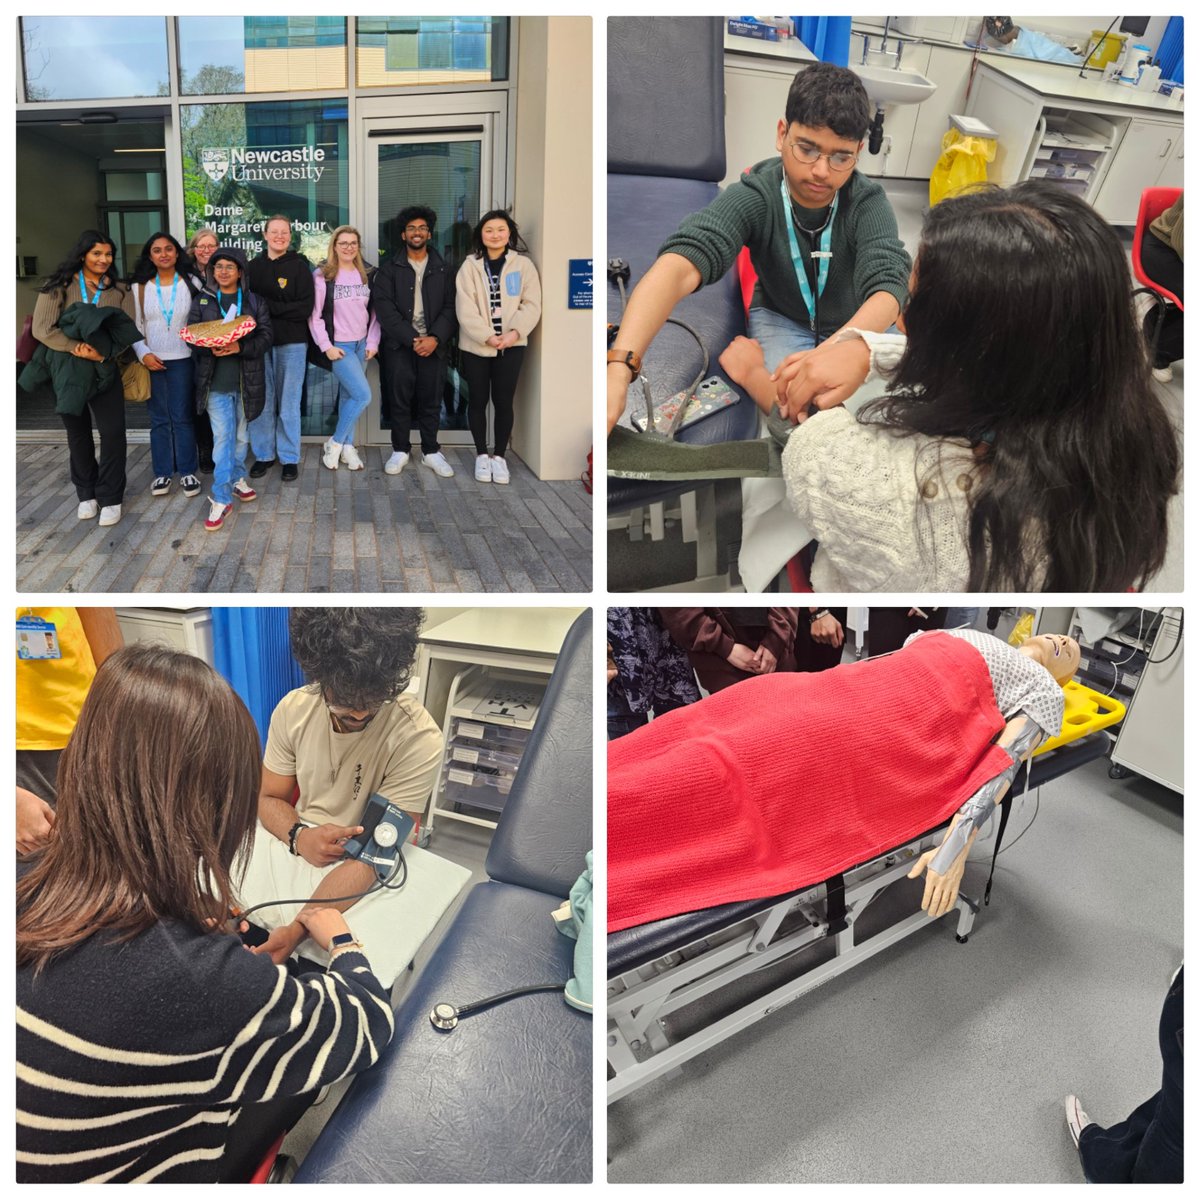 Thank you so much to @UniofNewcastle for providing our prospective medical students with a fantastic Medical Experience Day yesterday. The students had an amazing day and learnt so much from the variety of sessions and practical workshops!